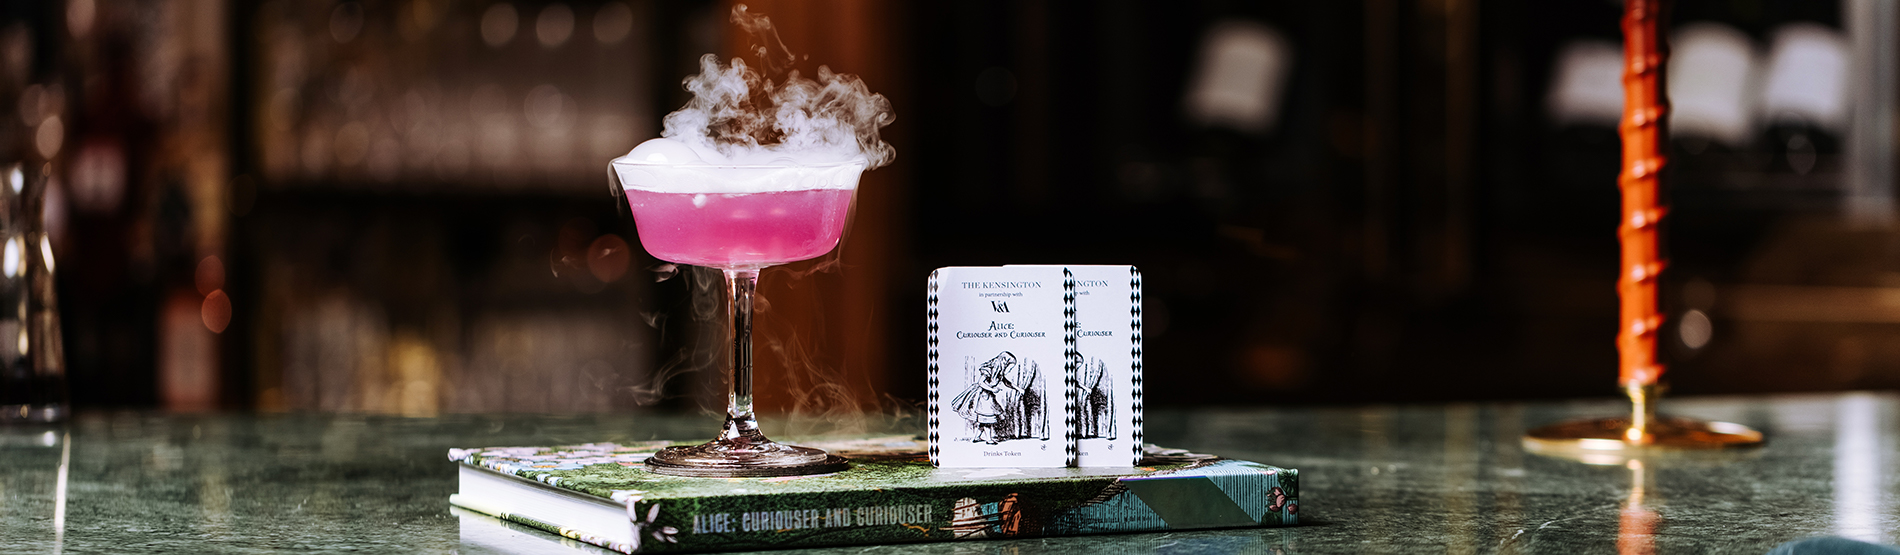 Pink cocktail with smoke